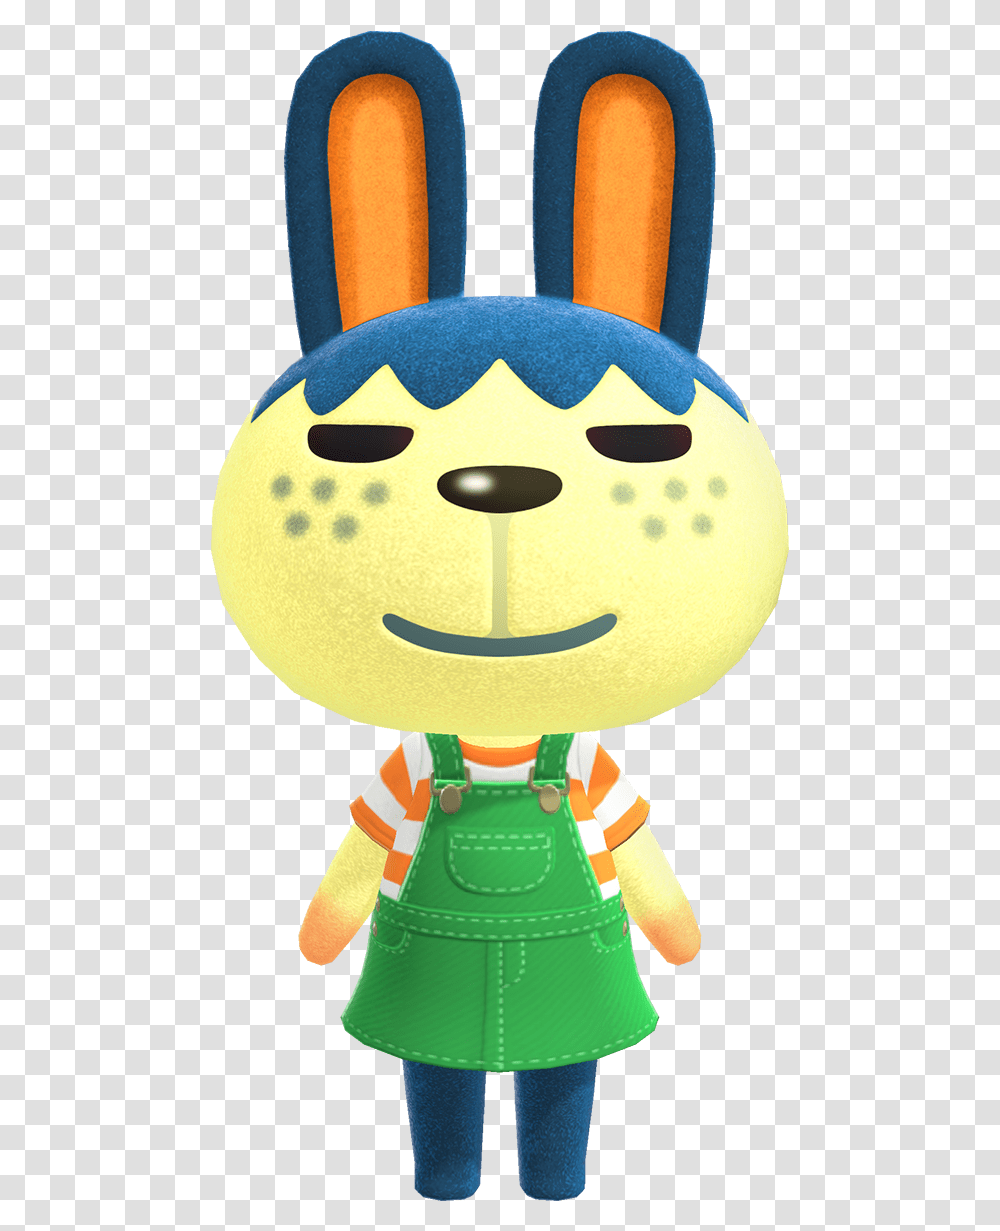 Pippy Animal Crossing Wiki Nookipedia Pippy Animal Crossing, Person, Human, Pac Man, Toy Transparent Png